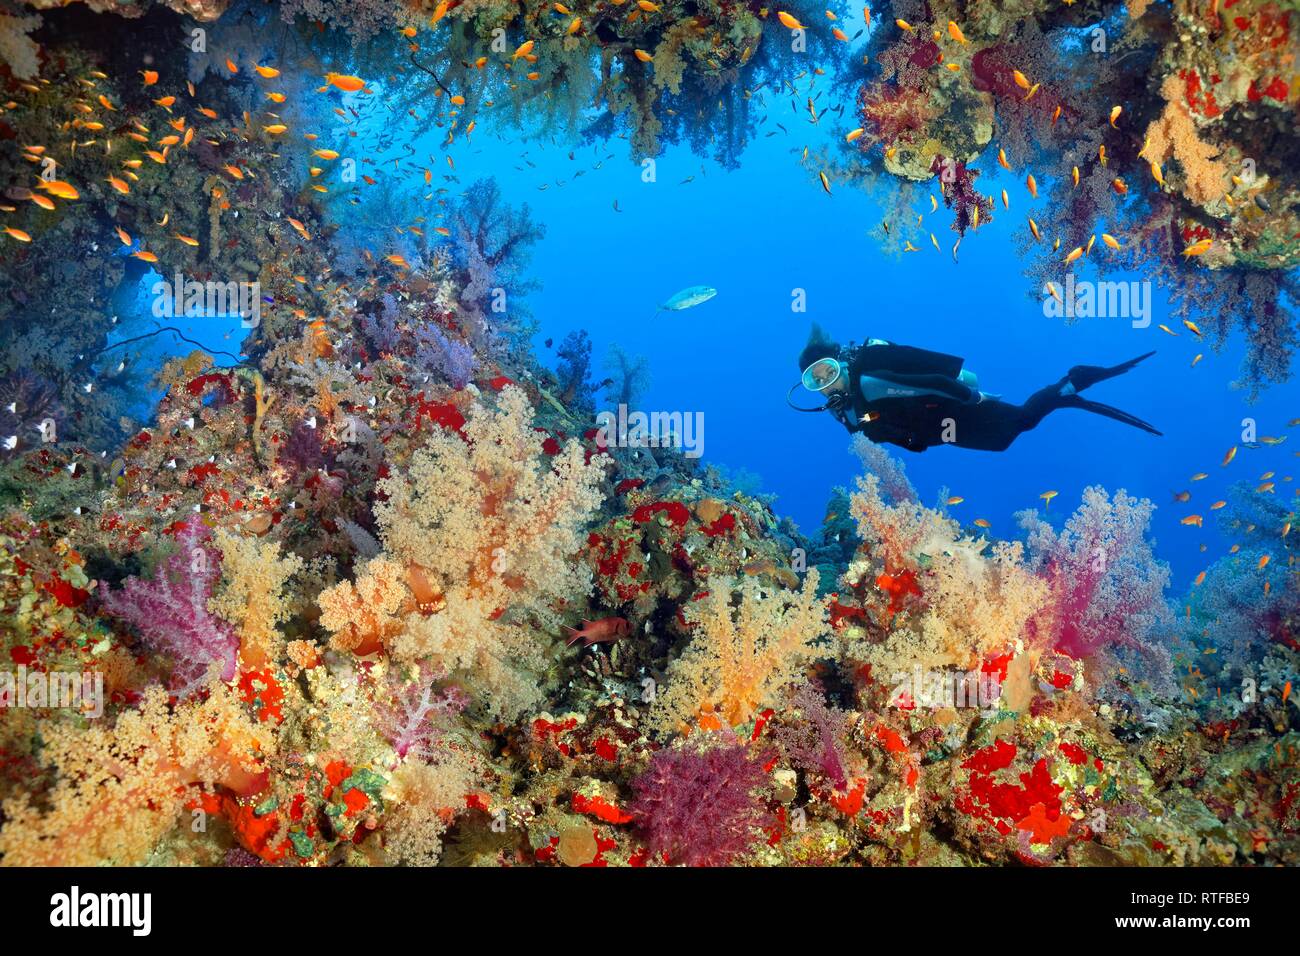 Diver observes breakthrough in coral reef, densely overgrown with various Soft corals (Alcyonacea), stone corals (Hexacorallia) Stock Photo